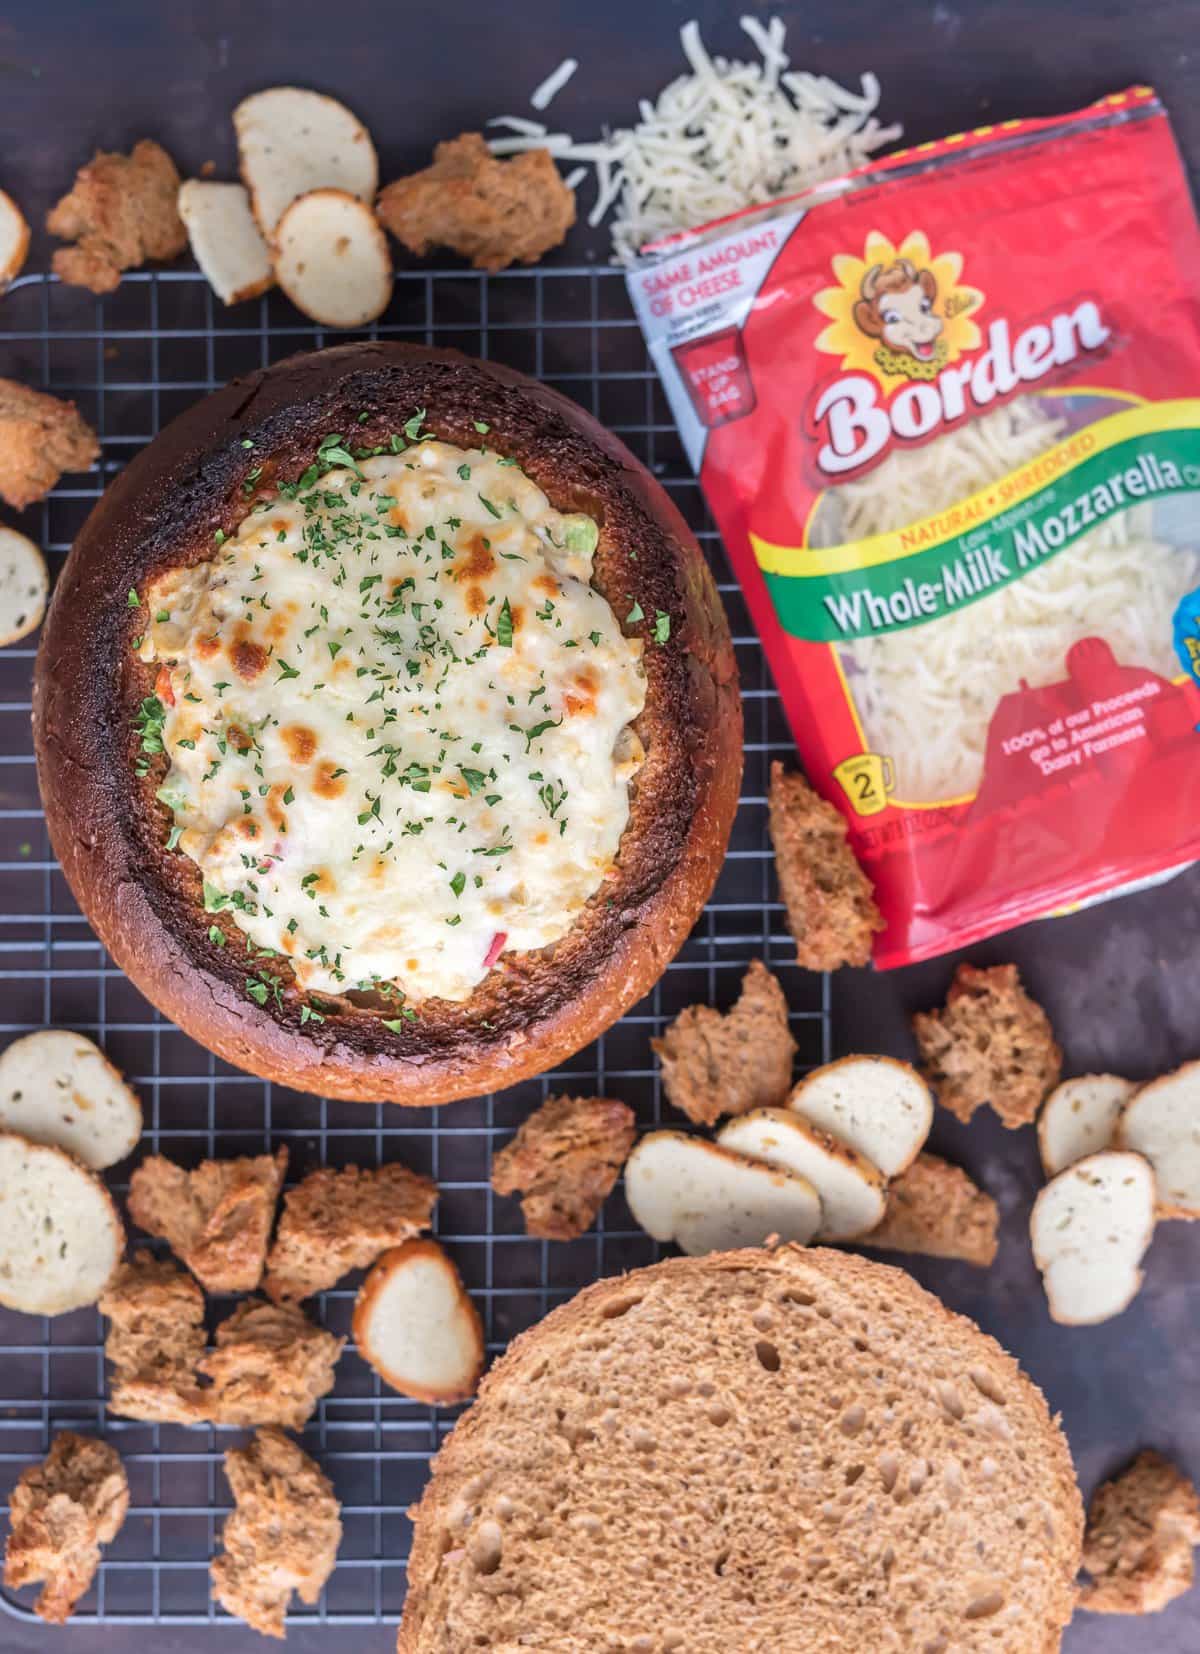 Cheesy bread bowl dip next to a package of shredded cheese